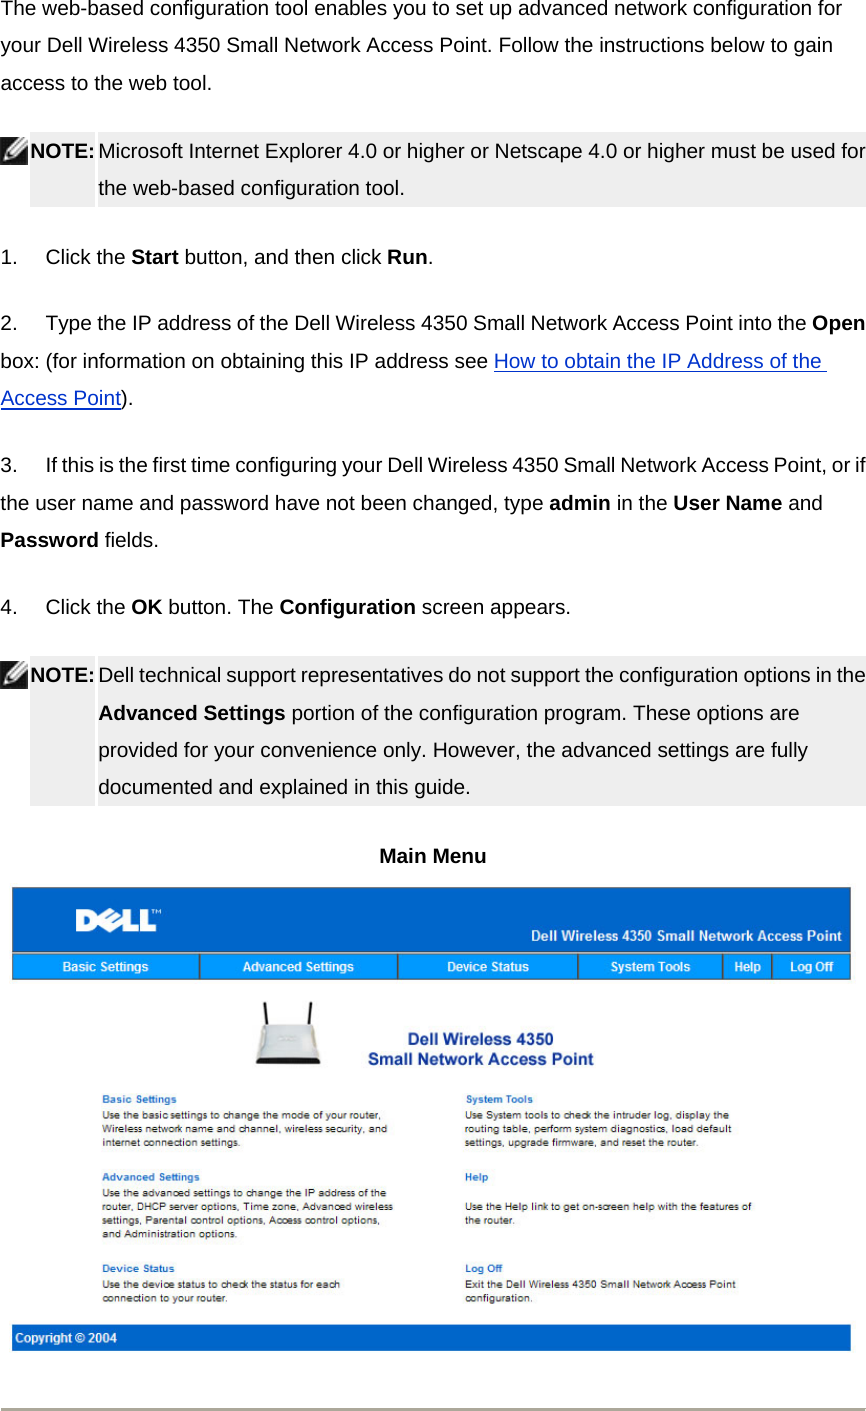 The web-based configuration tool enables you to set up advanced network configuration for your Dell Wireless 4350 Small Network Access Point. Follow the instructions below to gain access to the web tool.  NOTE: Microsoft Internet Explorer 4.0 or higher or Netscape 4.0 or higher must be used for the web-based configuration tool.   1.       Click the Start button, and then click Run. 2.       Type the IP address of the Dell Wireless 4350 Small Network Access Point into the Open box: (for information on obtaining this IP address see How to obtain the IP Address of the Access Point).  3.       If this is the first time configuring your Dell Wireless 4350 Small Network Access Point, or if the user name and password have not been changed, type admin in the User Name and Password fields. 4.       Click the OK button. The Configuration screen appears.  NOTE: Dell technical support representatives do not support the configuration options in the Advanced Settings portion of the configuration program. These options are provided for your convenience only. However, the advanced settings are fully documented and explained in this guide.  Main Menu   